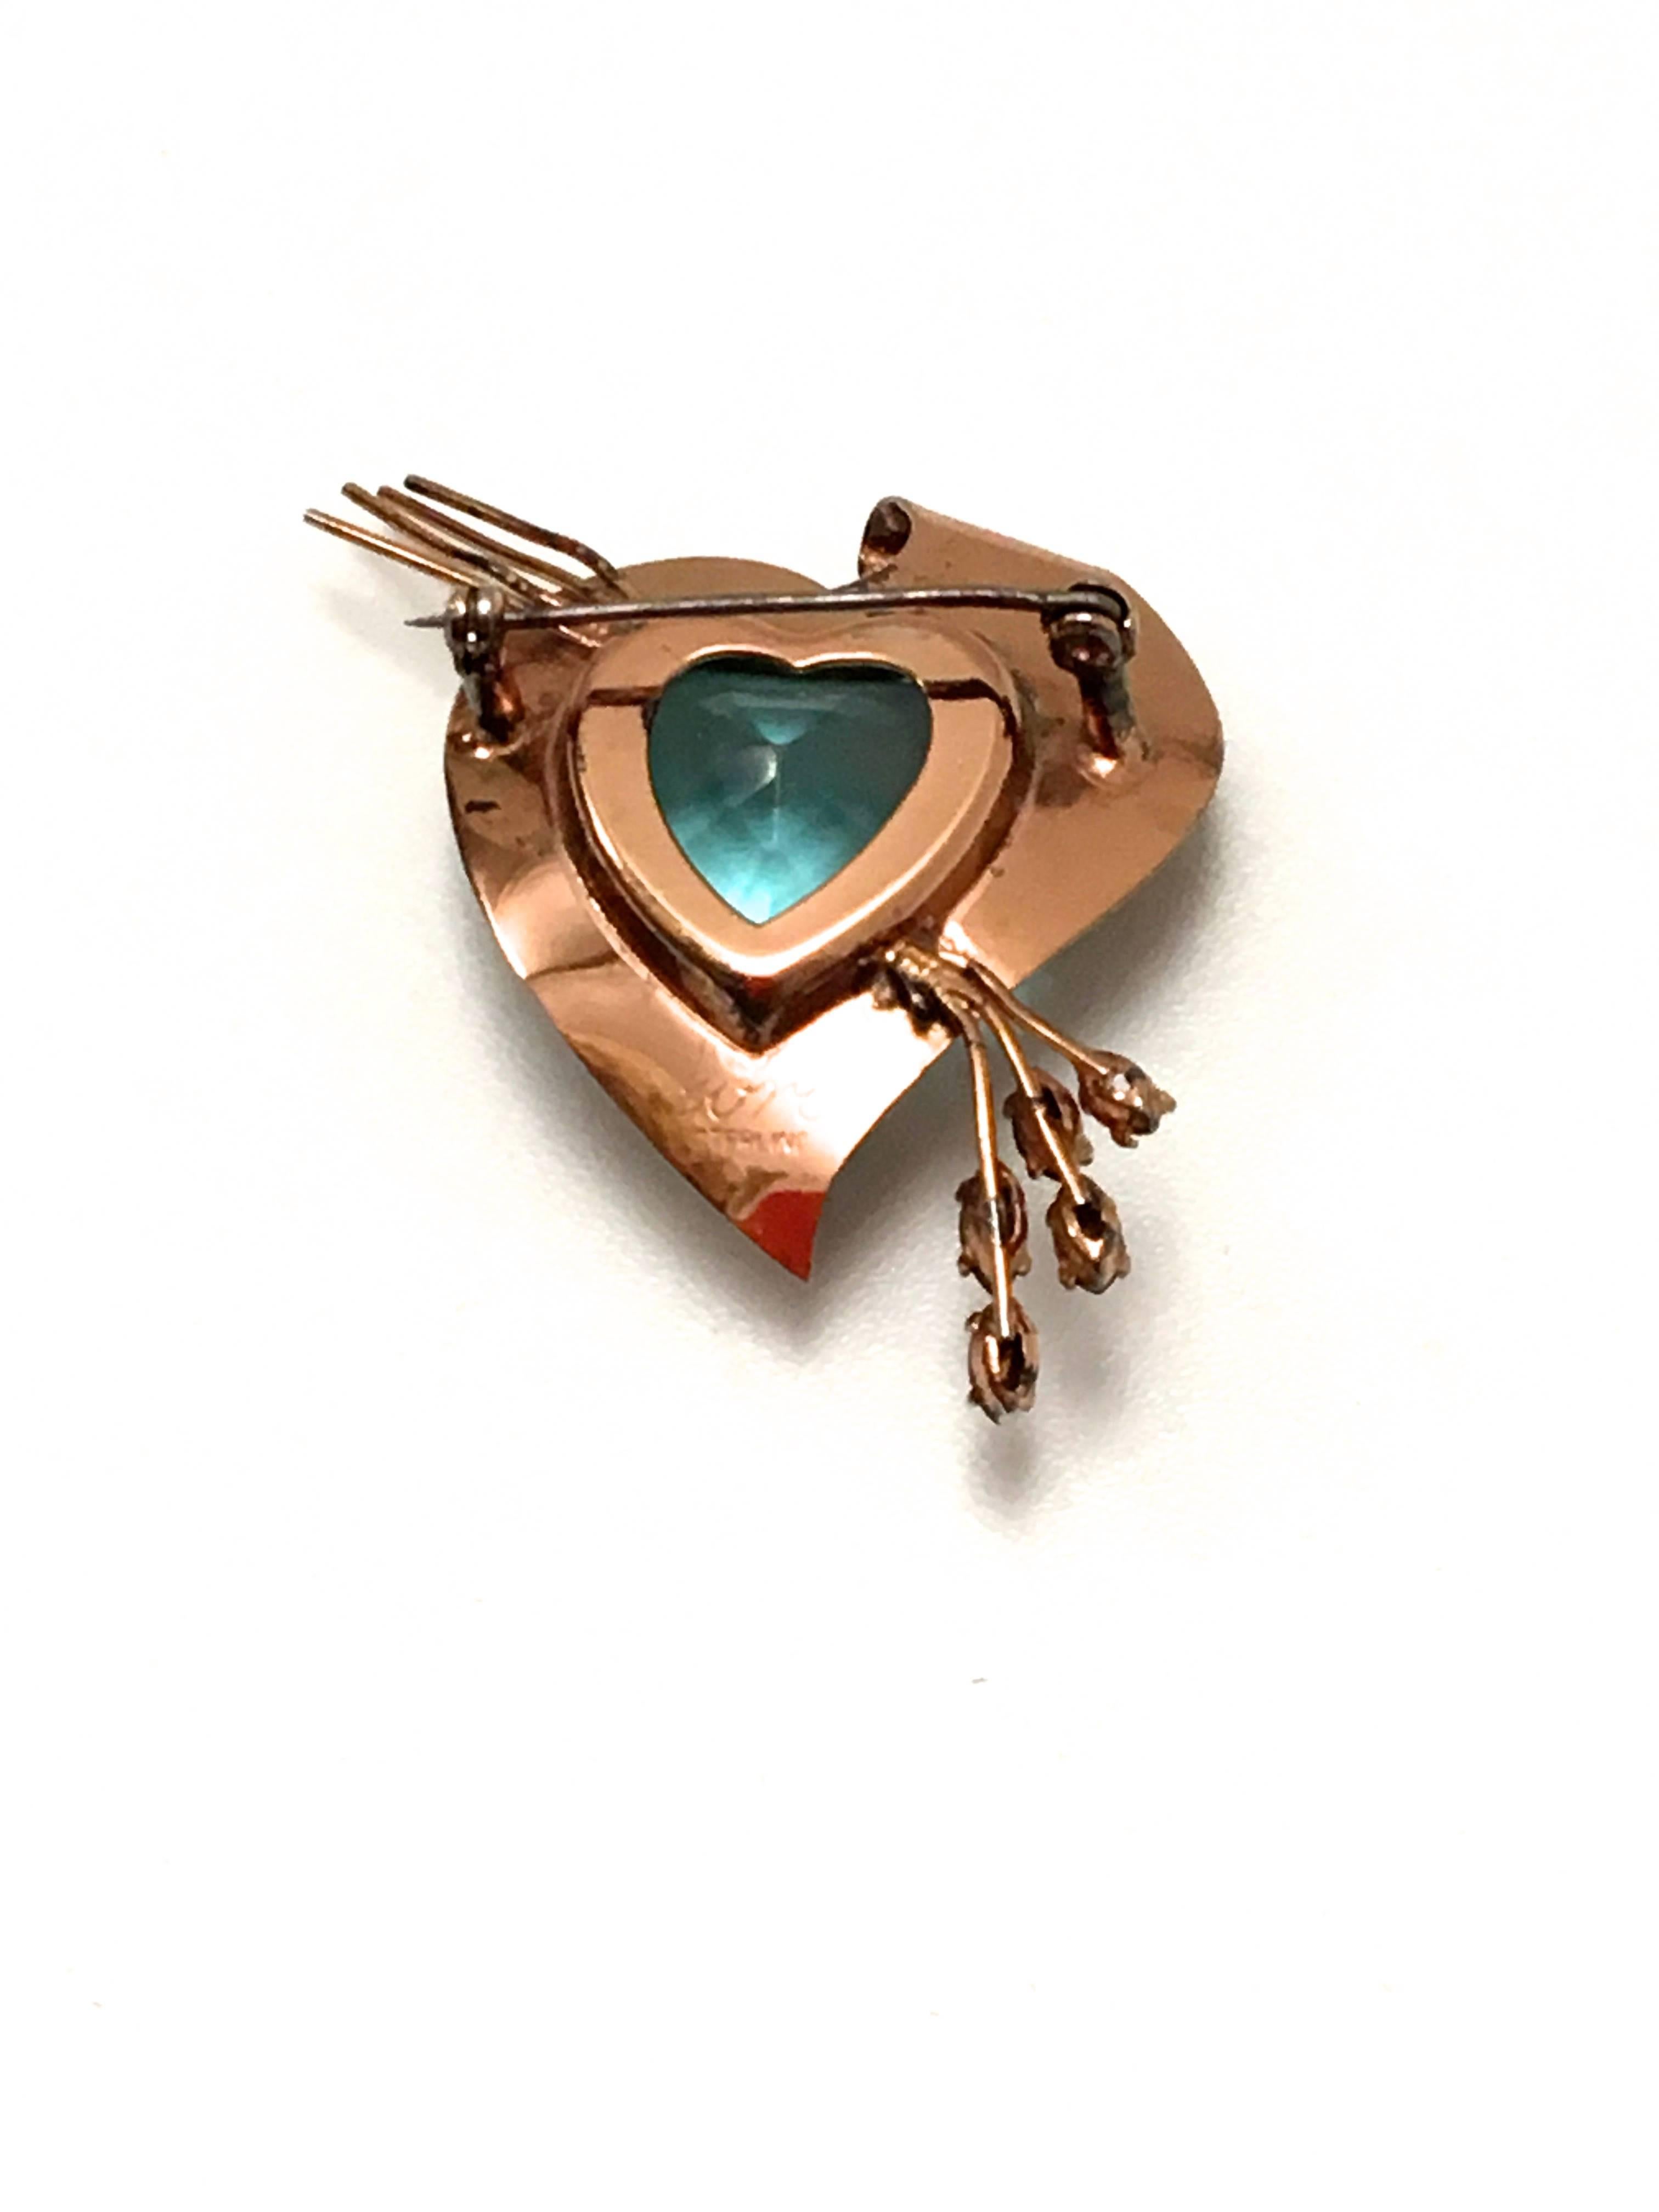 Presented here is a brooch from Coro from the 1950s. This beautiful brooch is comprised of a sterling silver covered with gold vermeil brooch frame. The main frame of the brooch houses a heart shaped center stone. The stone is a vibrant bright blue.